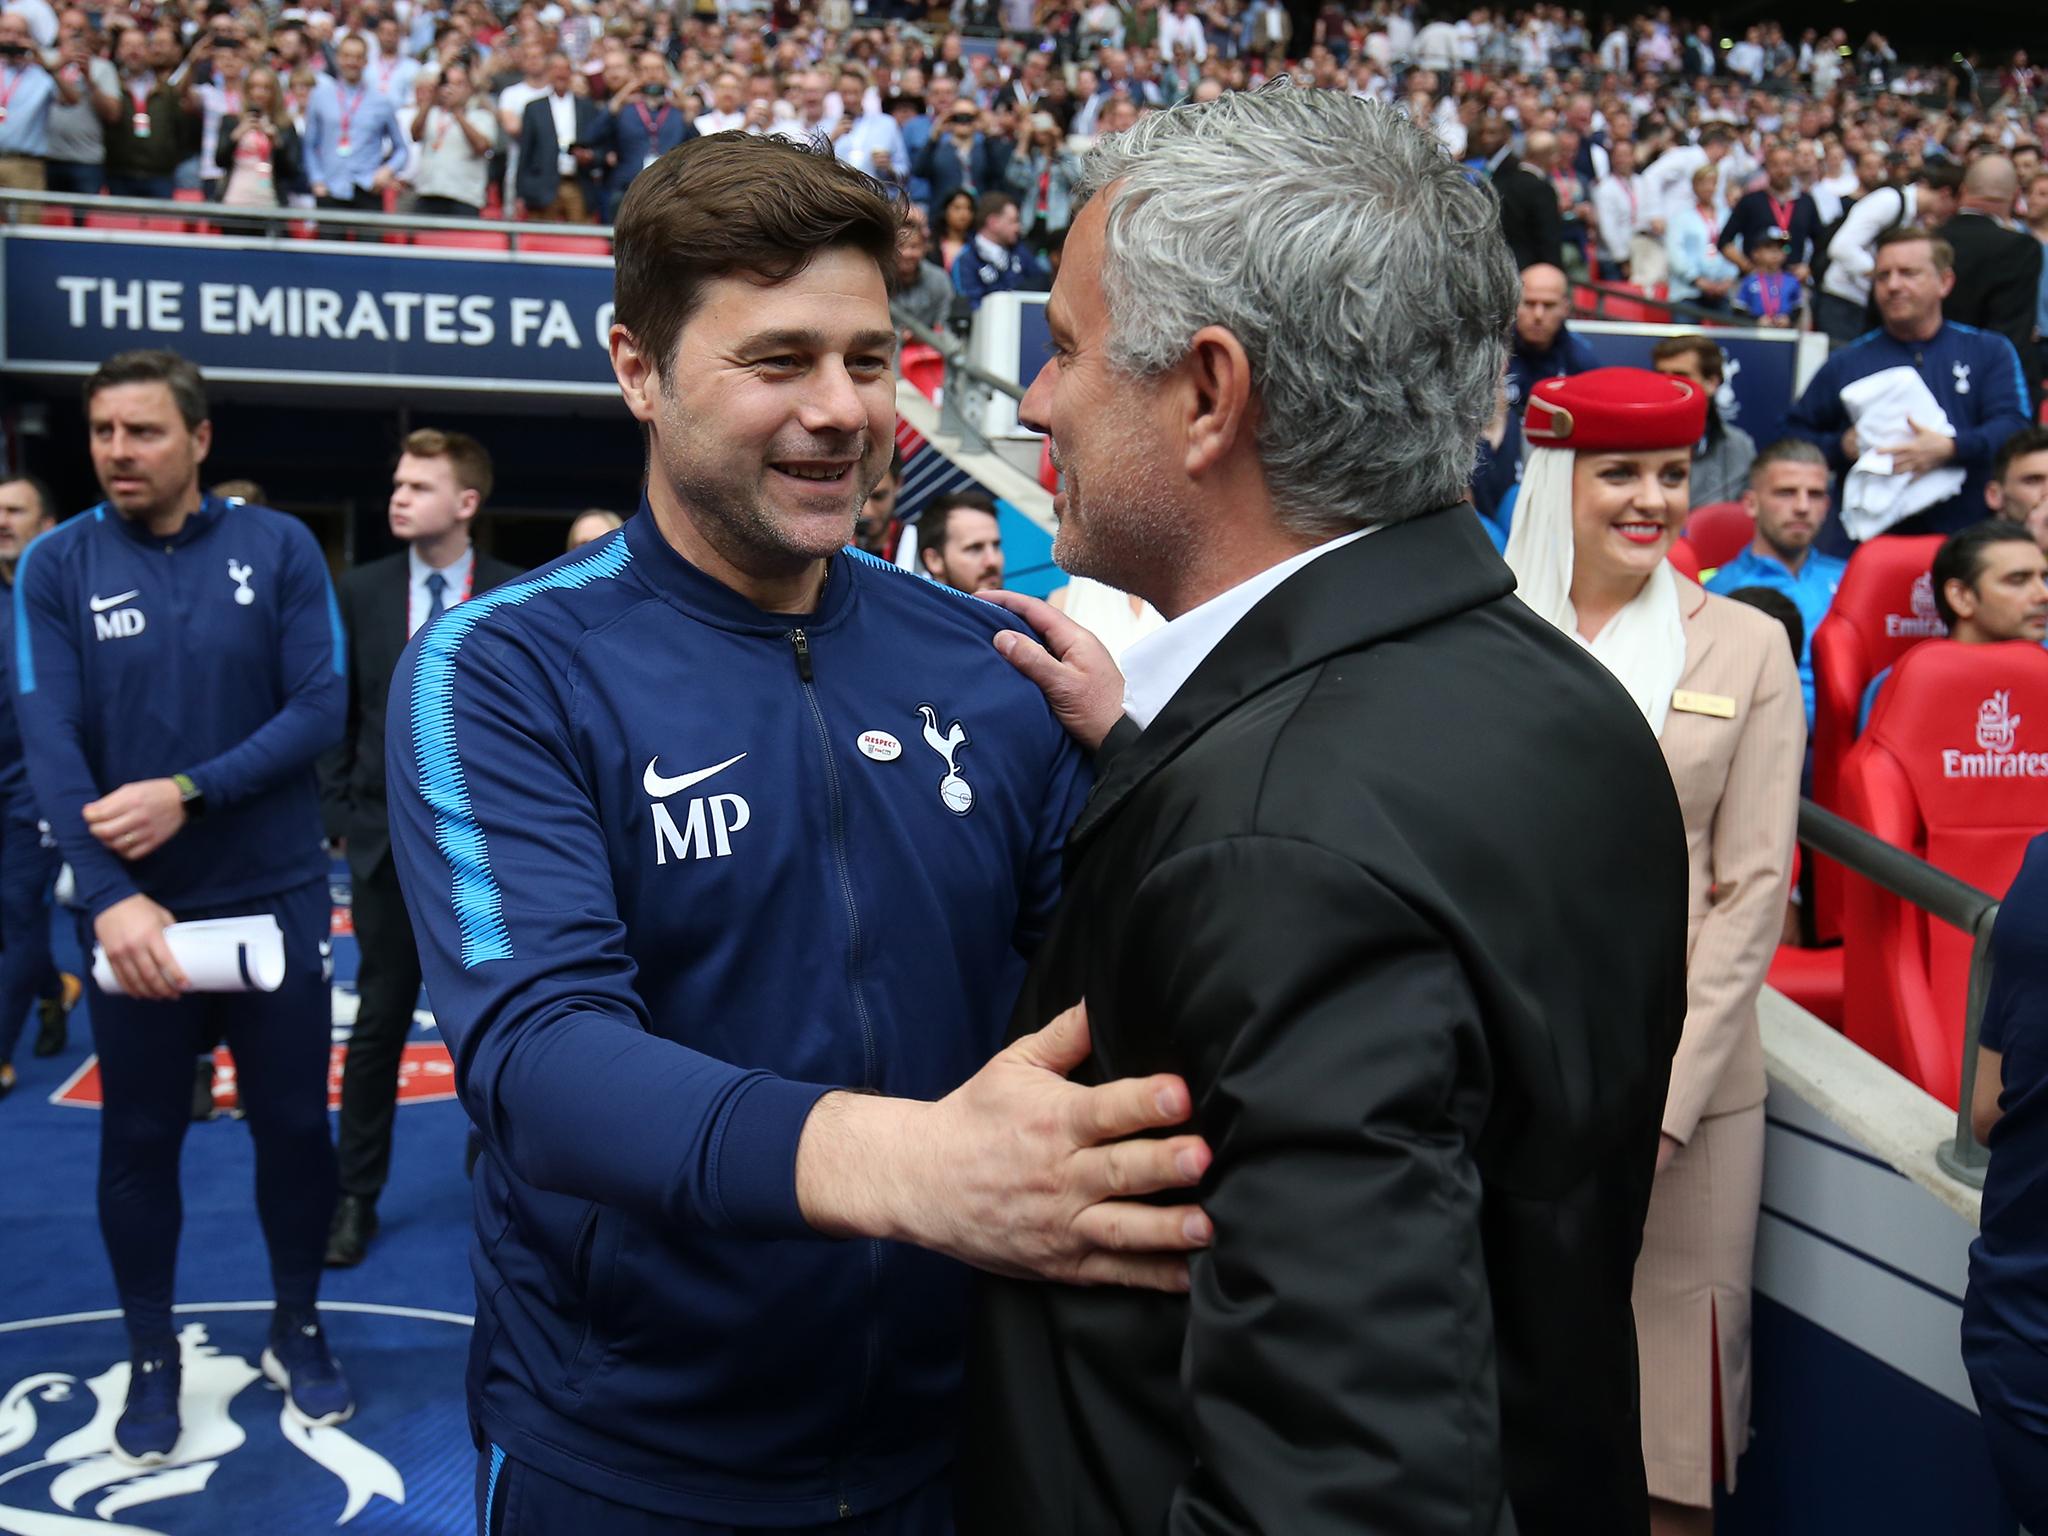 Mauricio Pochettino is the perfect replacement for Jose Mourinho at Manchester United, believes Gary Neville